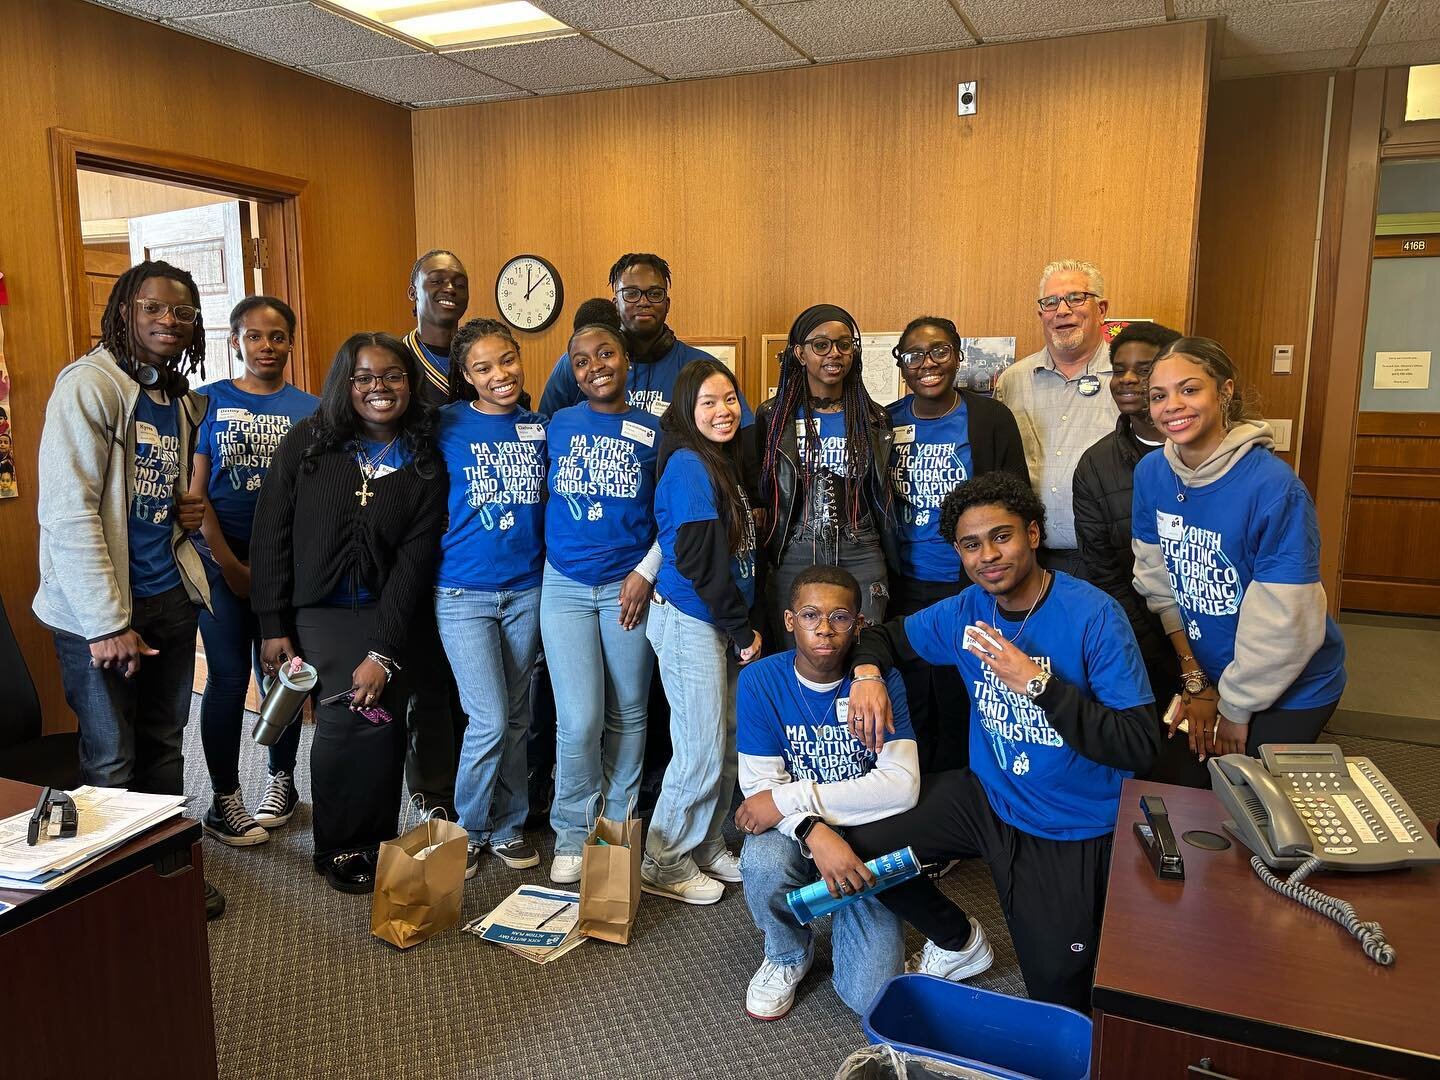 Today ACES youth participated in @the84_movement Kick Butts Day Conference where they had the opportunity to speak with the offices of Senator Michael Brady and Representative William C. Galvin about tobacco laws and policy. We are so proud of our yo